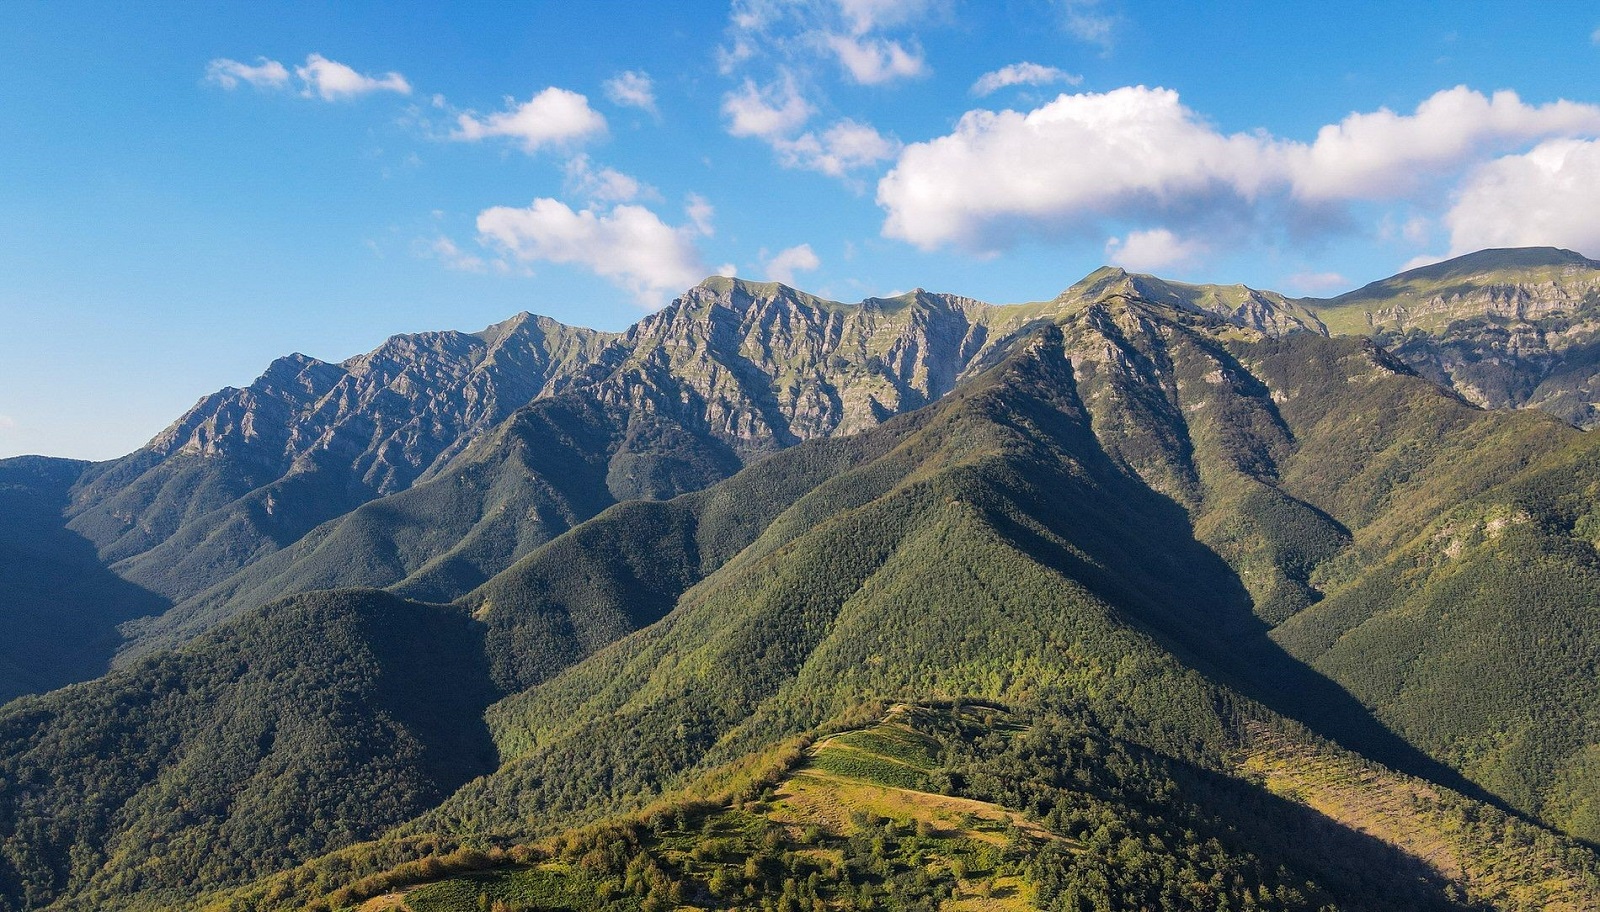 The Tuscan-Emilian Apennines National Park in Lunigiana